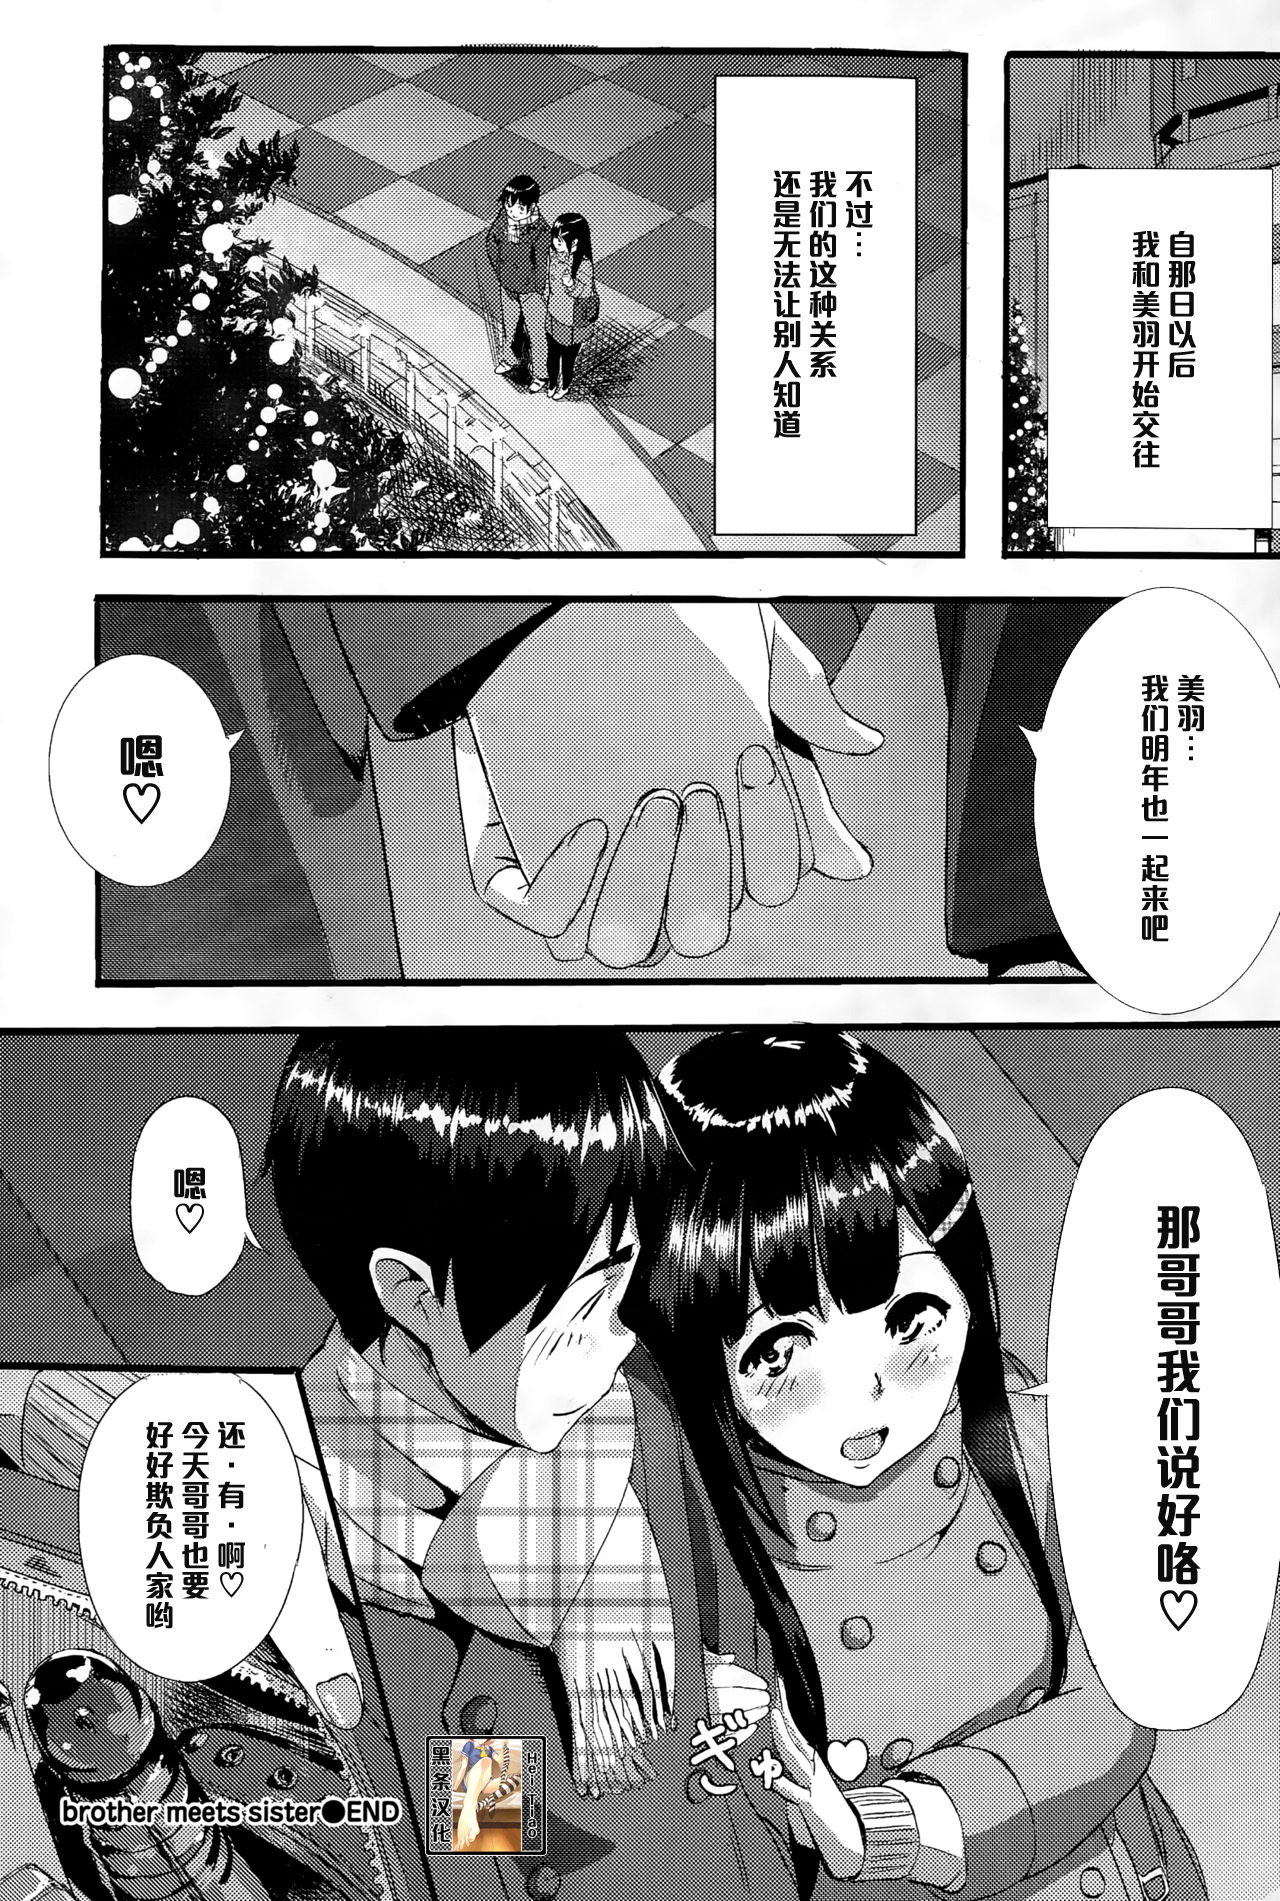 [waves] brother meets sister (COMIC BAVEL 2015-06) [Chinese] [黑条汉化] [waves] brother meets sister (COMIC BAVEL 2015年6月号) [中文翻譯]